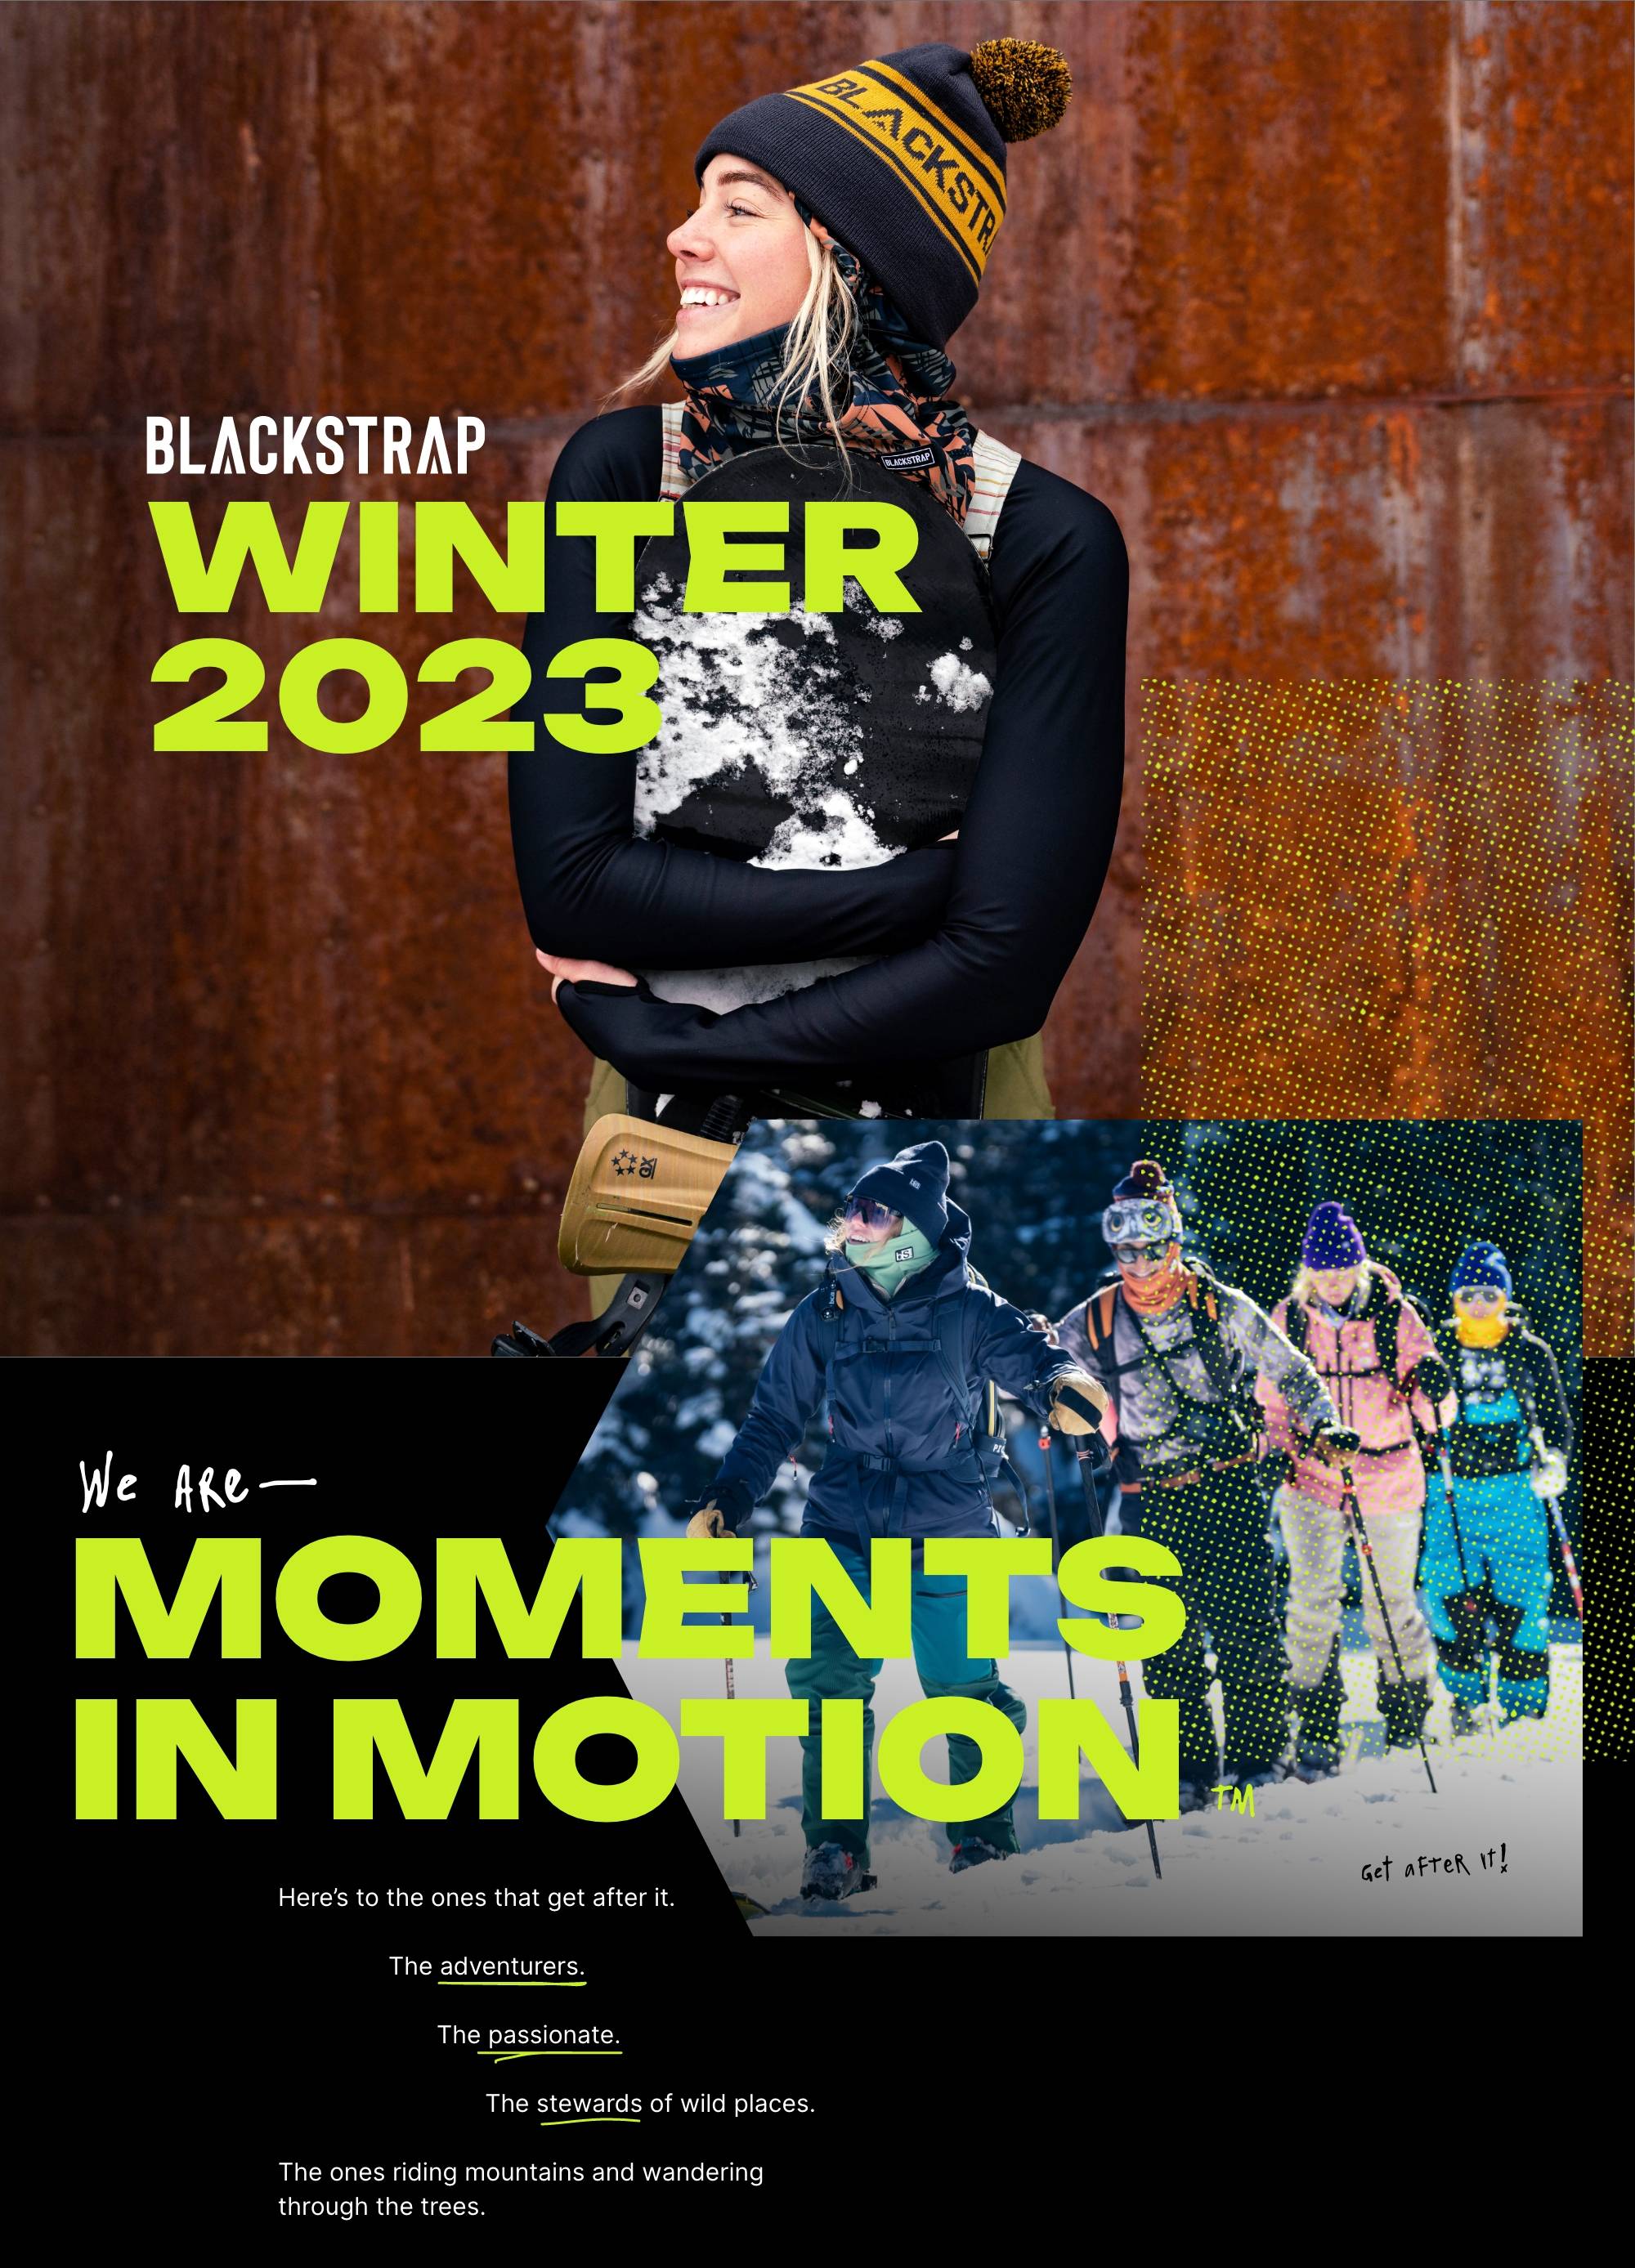 Blackstrap Winter 2023. We are moments in motion. Here's to the ones that get after it. The adventurers. The passionate. The stewards of wild places. The ones riding mountains and wandering through the trees.